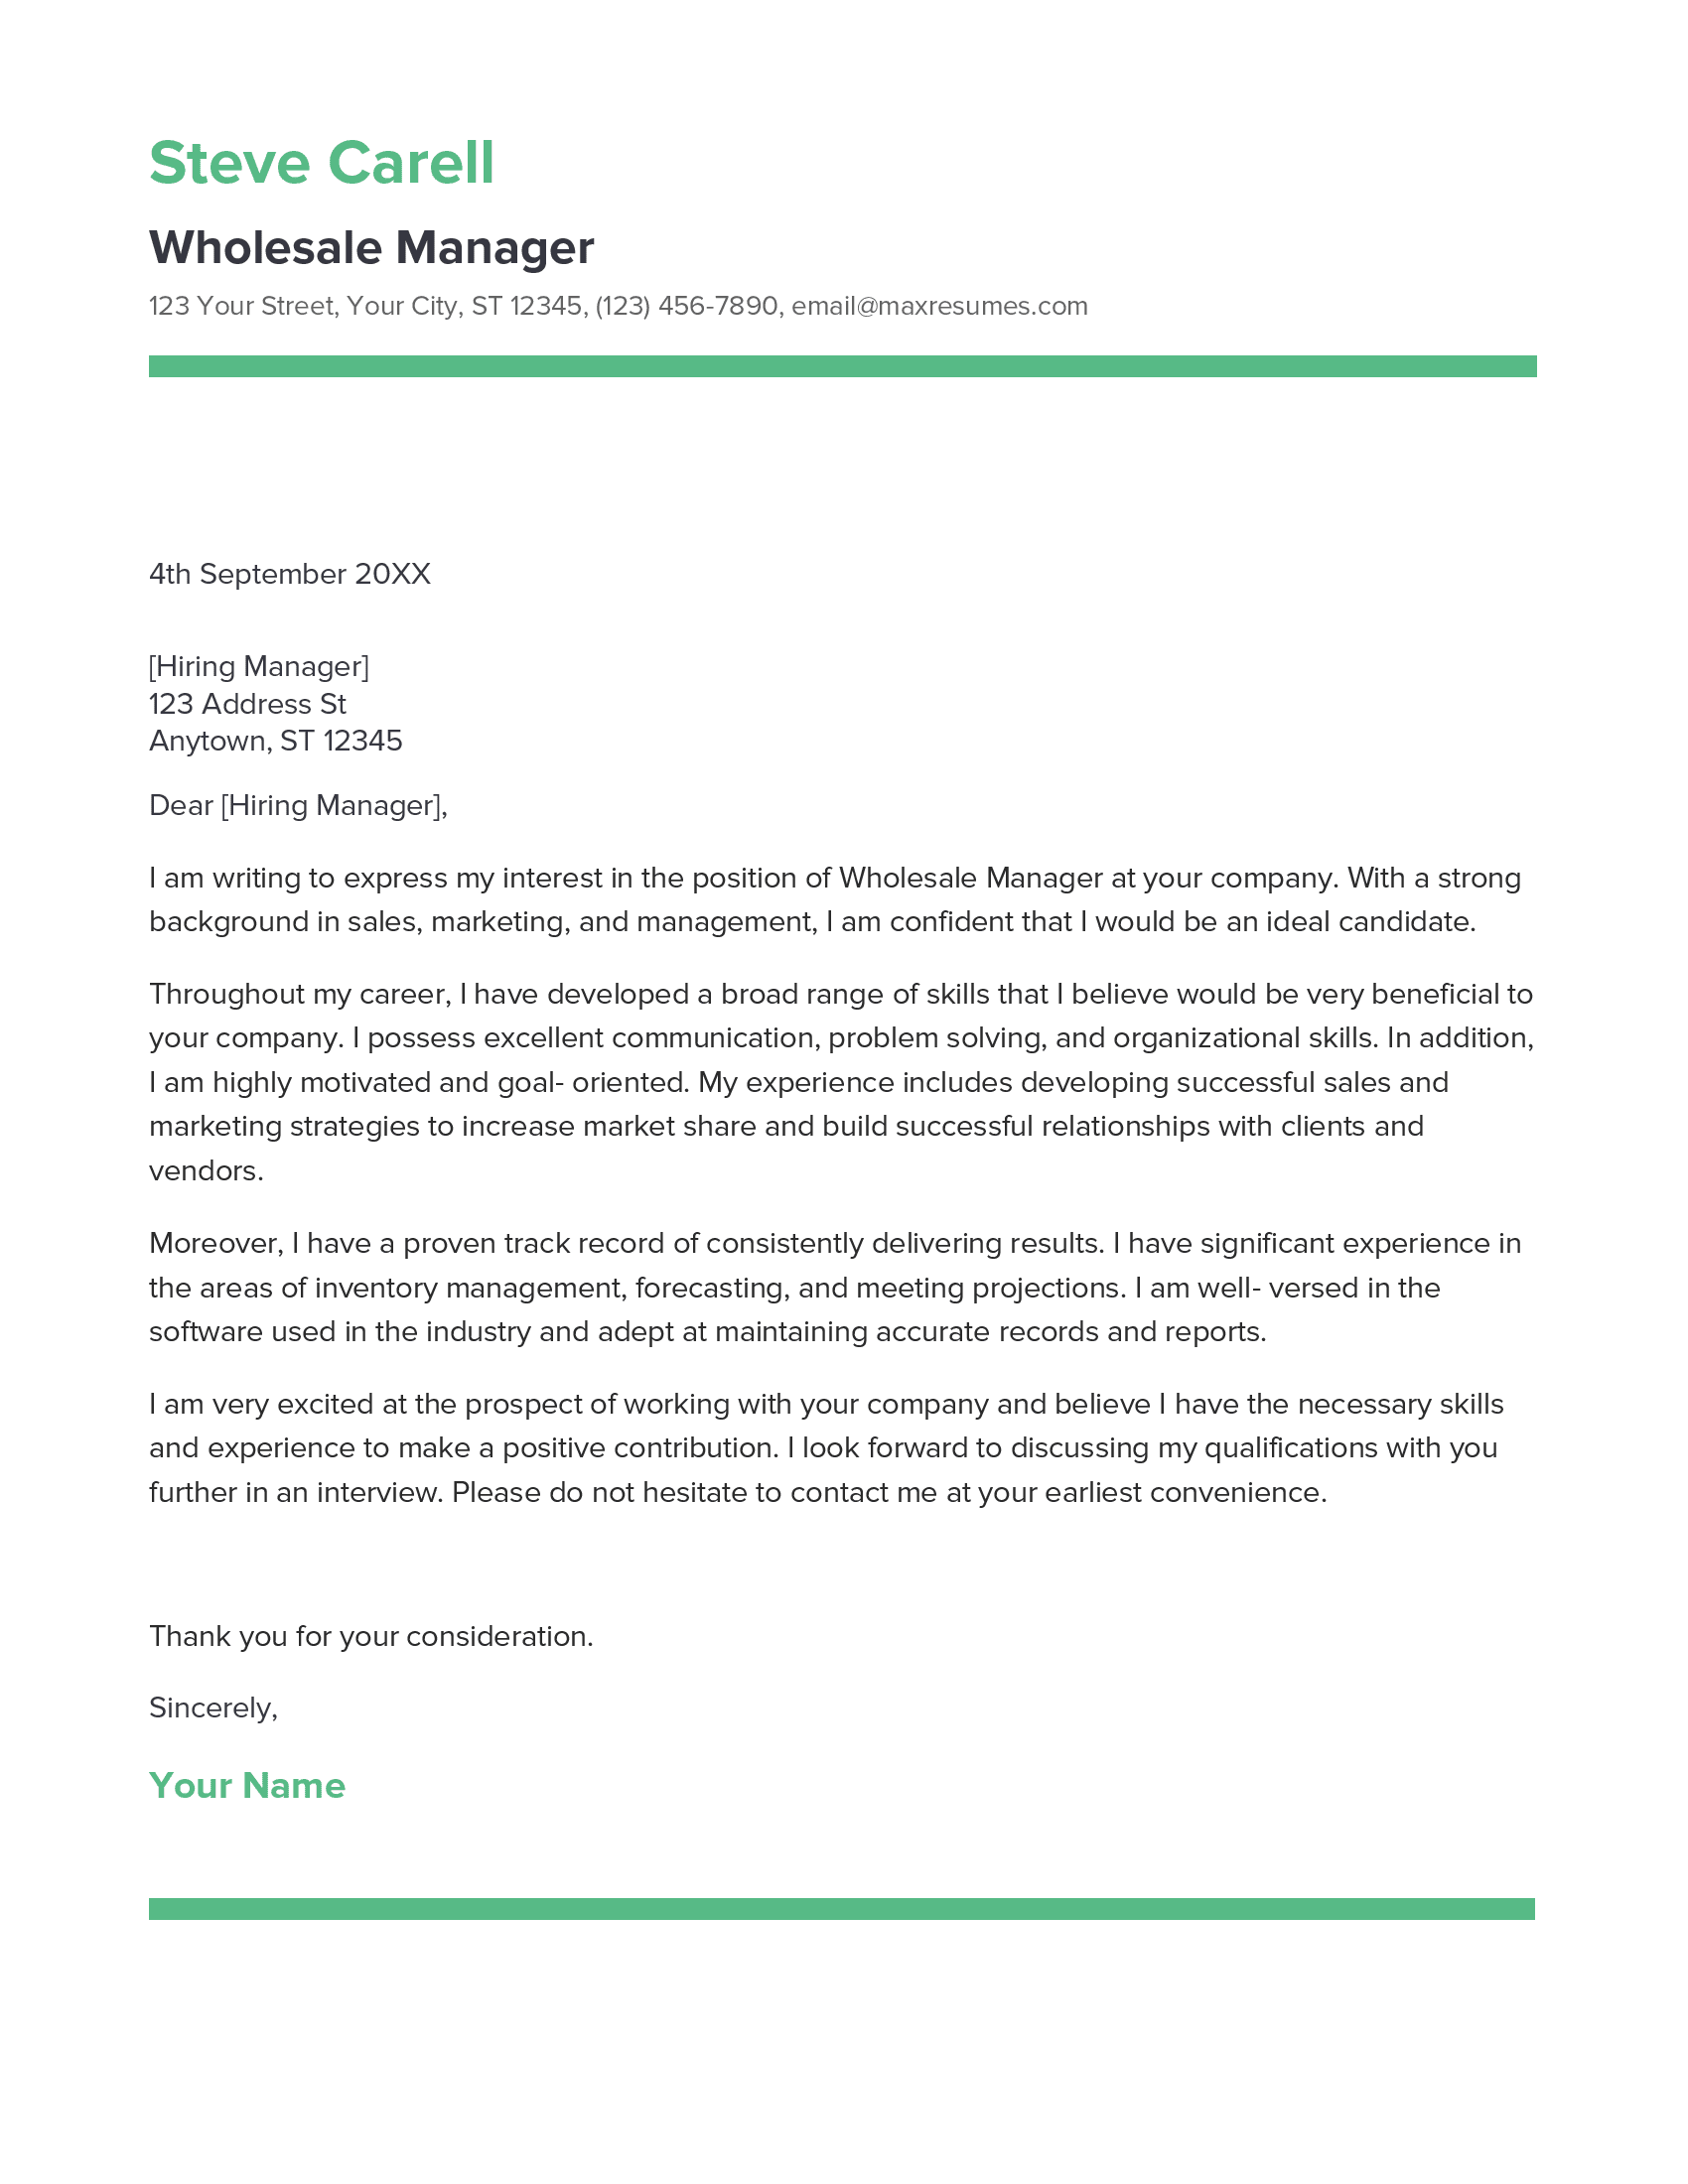 Wholesale Manager Cover Letter Example